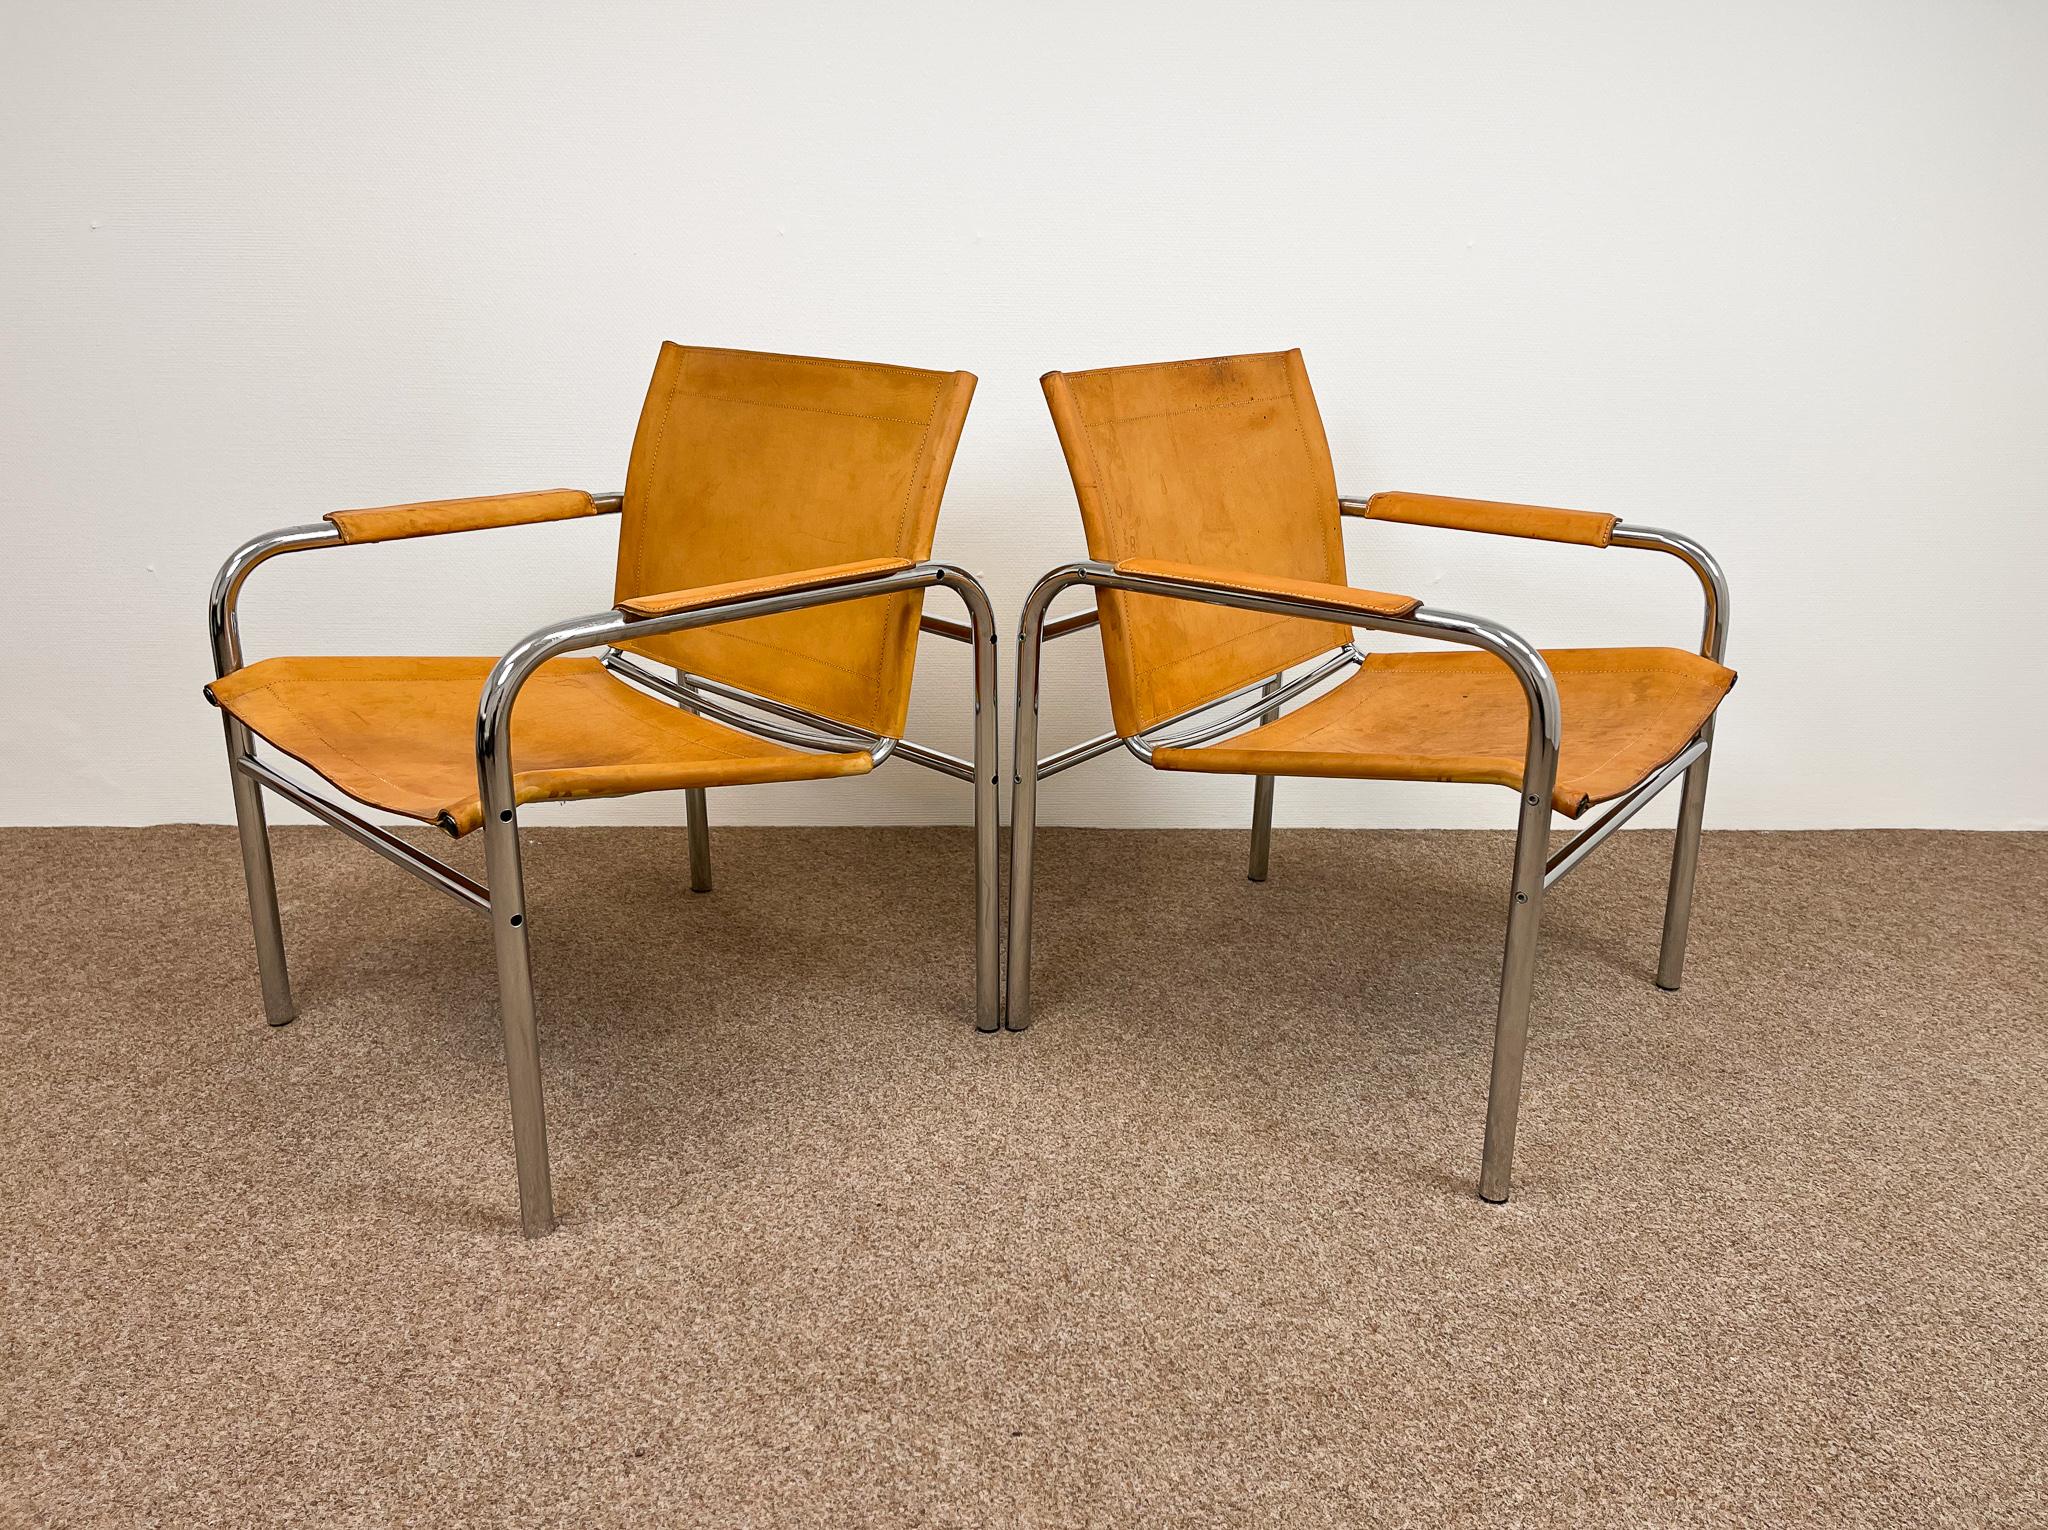 These two beautiful pair of armchairs, model Klinte, was designed by Tord Bjorklund, Sweden and produced for Ikea in the early 1980s. Today they are a vintage icon. The chairs having a tubular chromed steel frame with natural brown-taupe leather